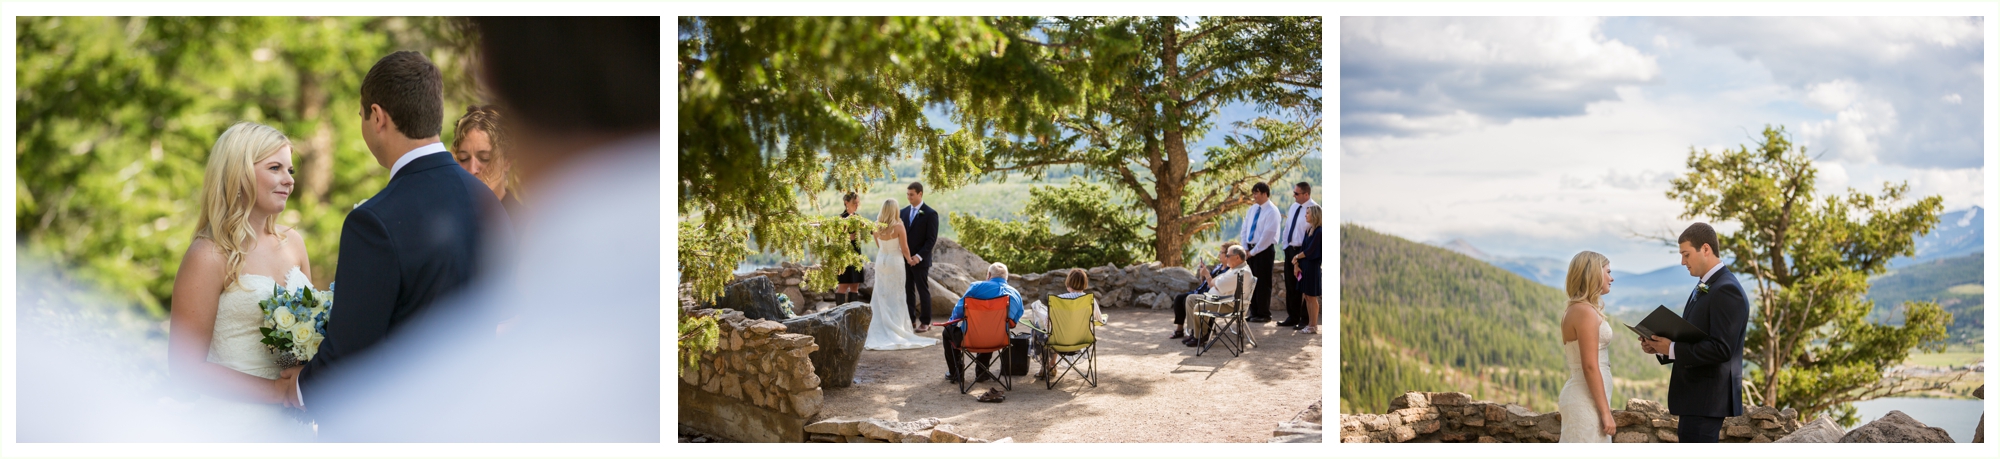 sapphire point overlook wedding ceremony at lake dillon colorado